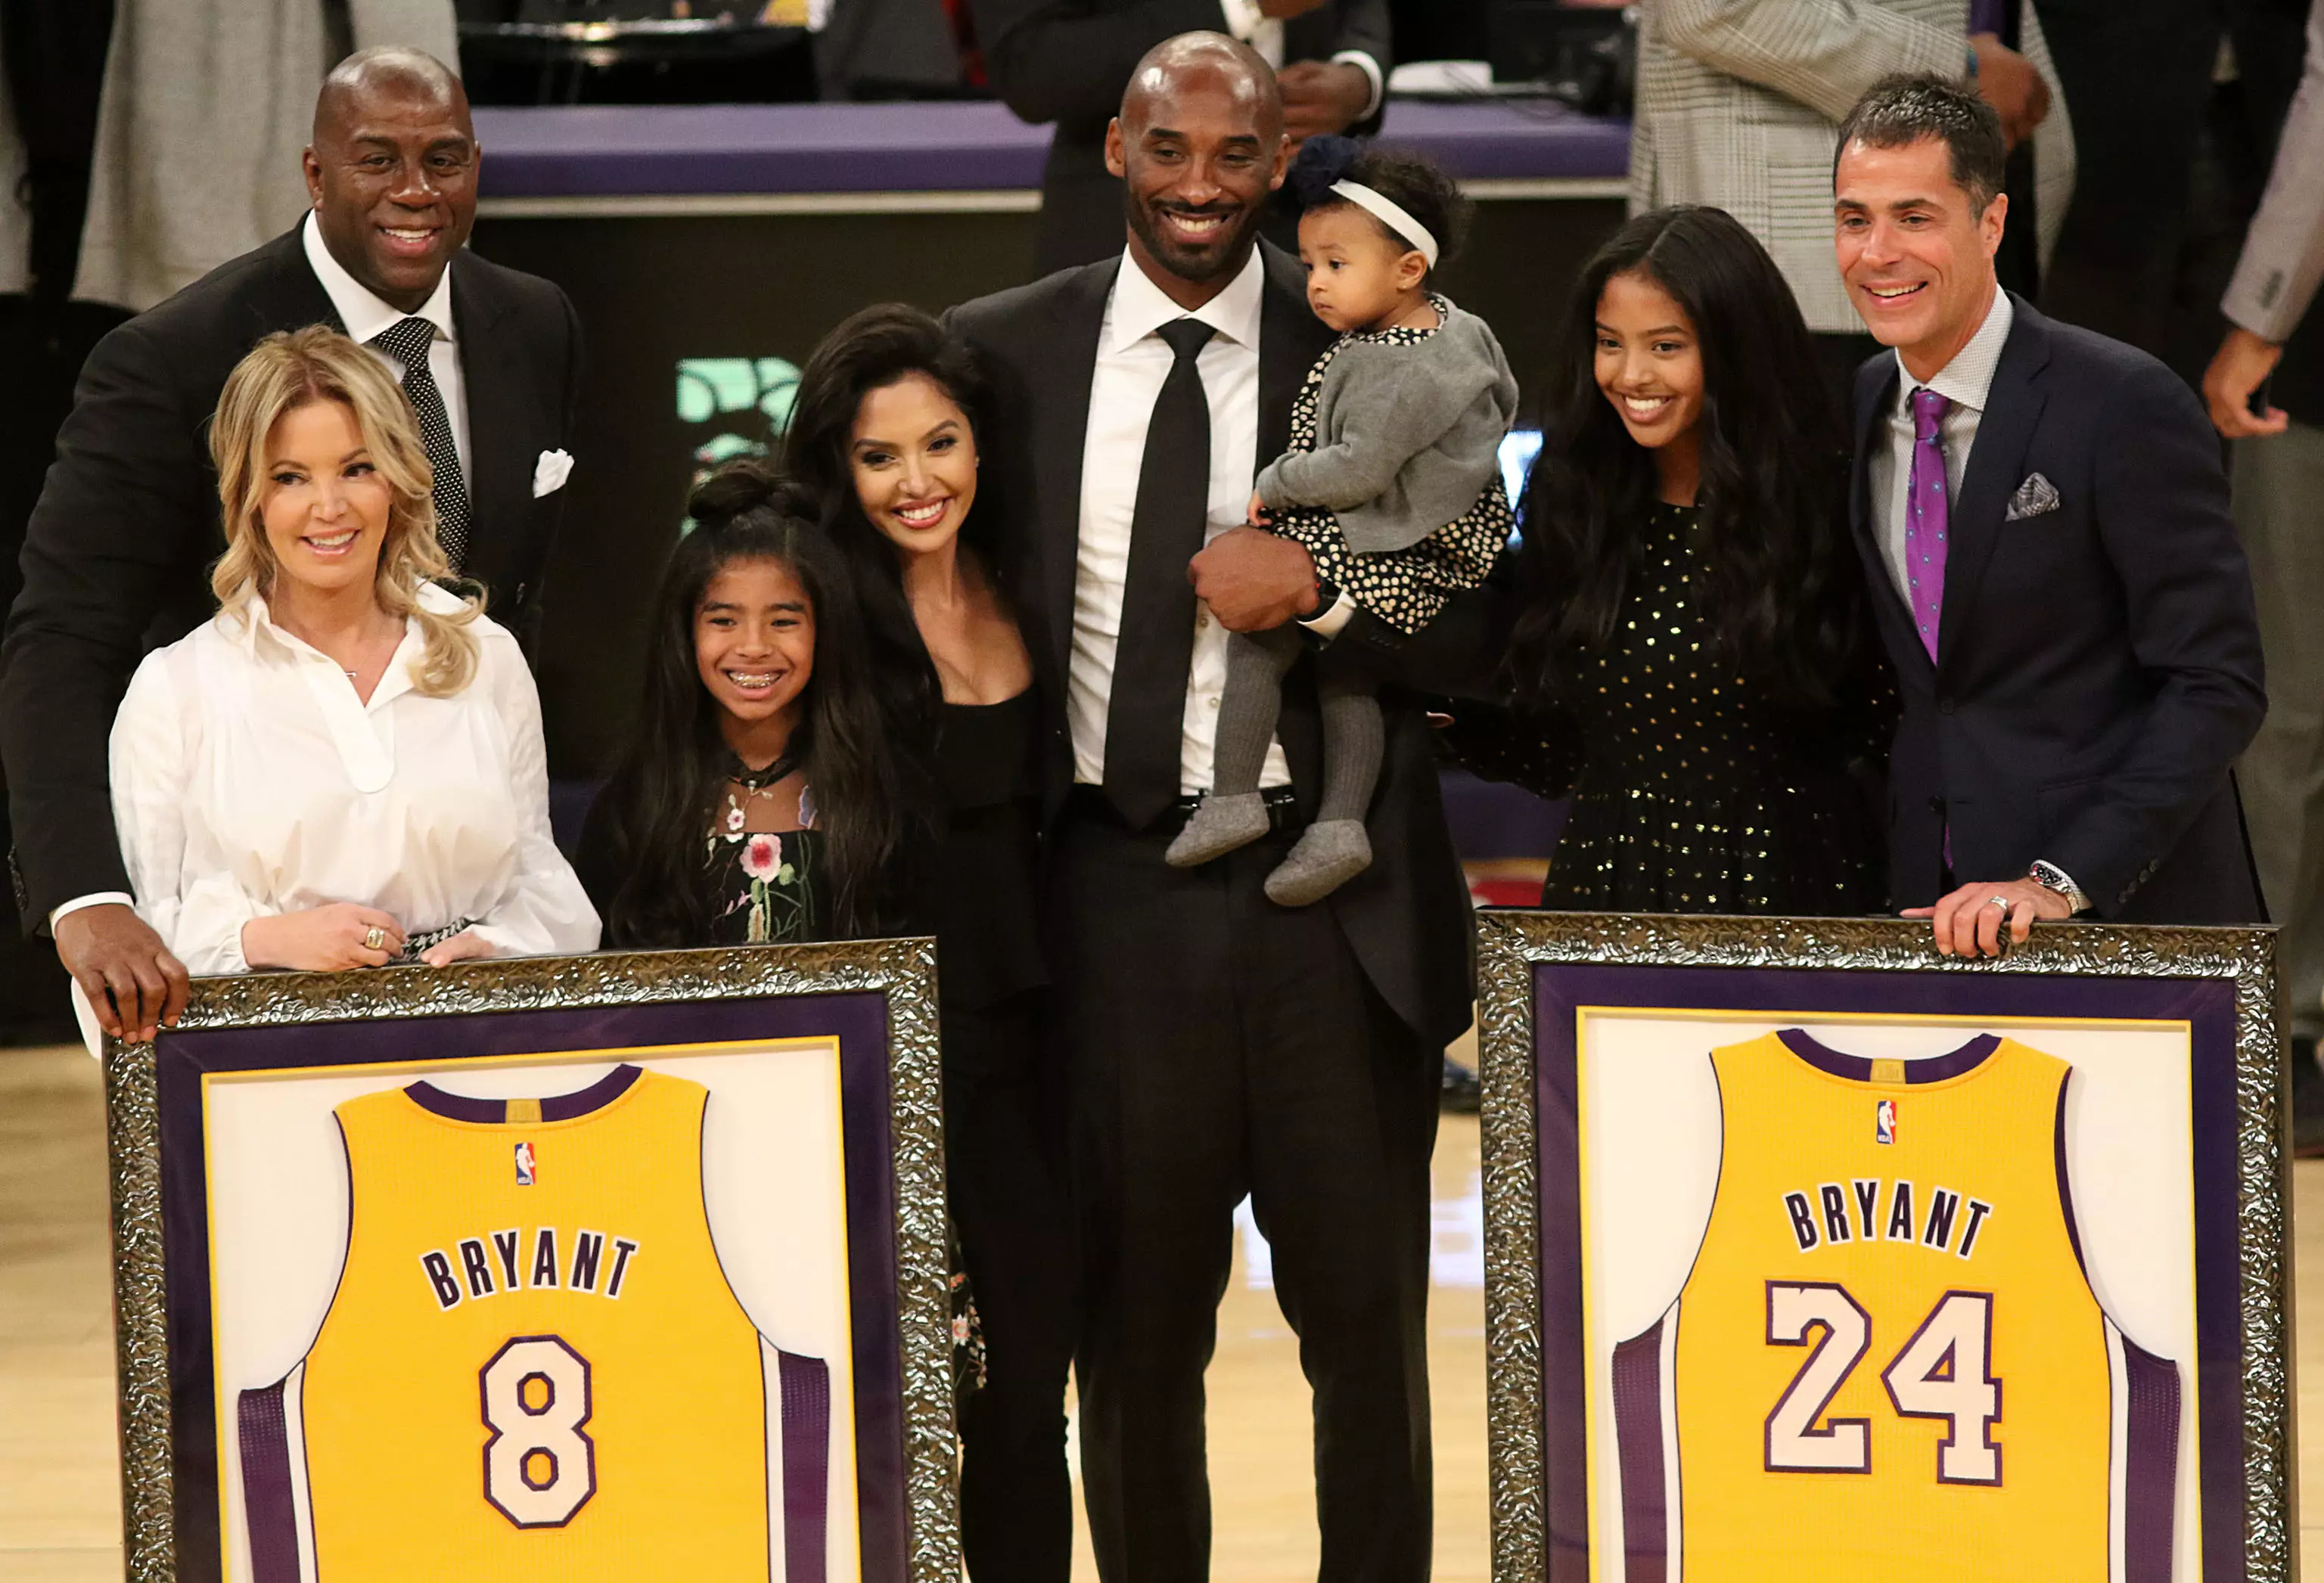 NBS legend Kobe Bryant and his daughter Gianna tragically died in a helicopter crash this morning.